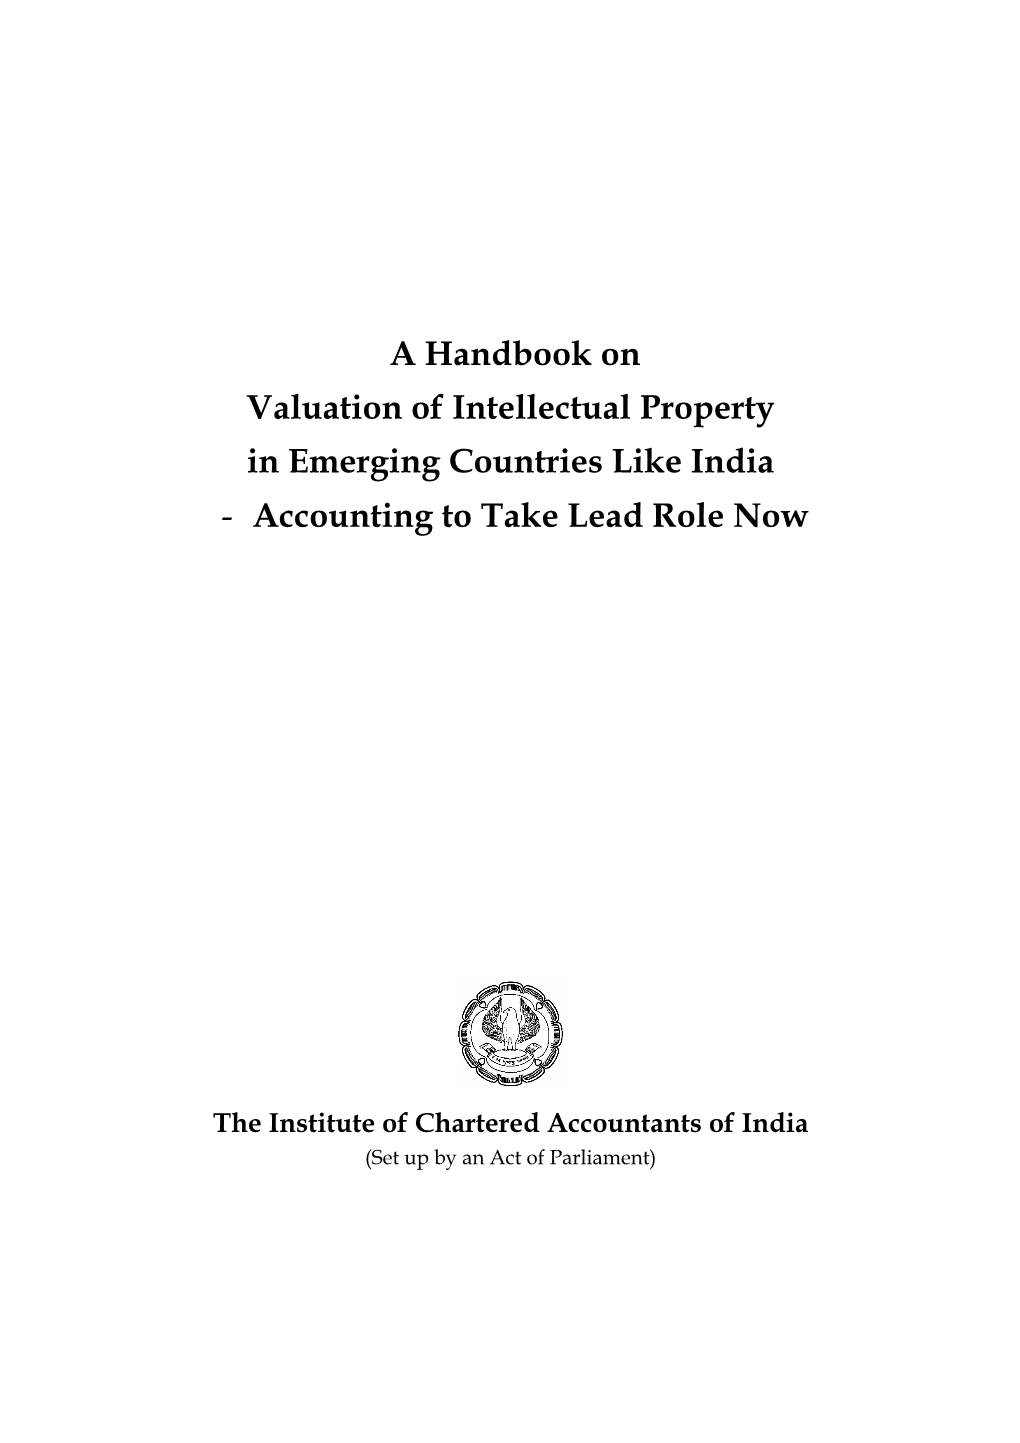 A Handbook on Valuation of Intellectual Property in Emerging Countries Like India - Accounting to Take Lead Role Now